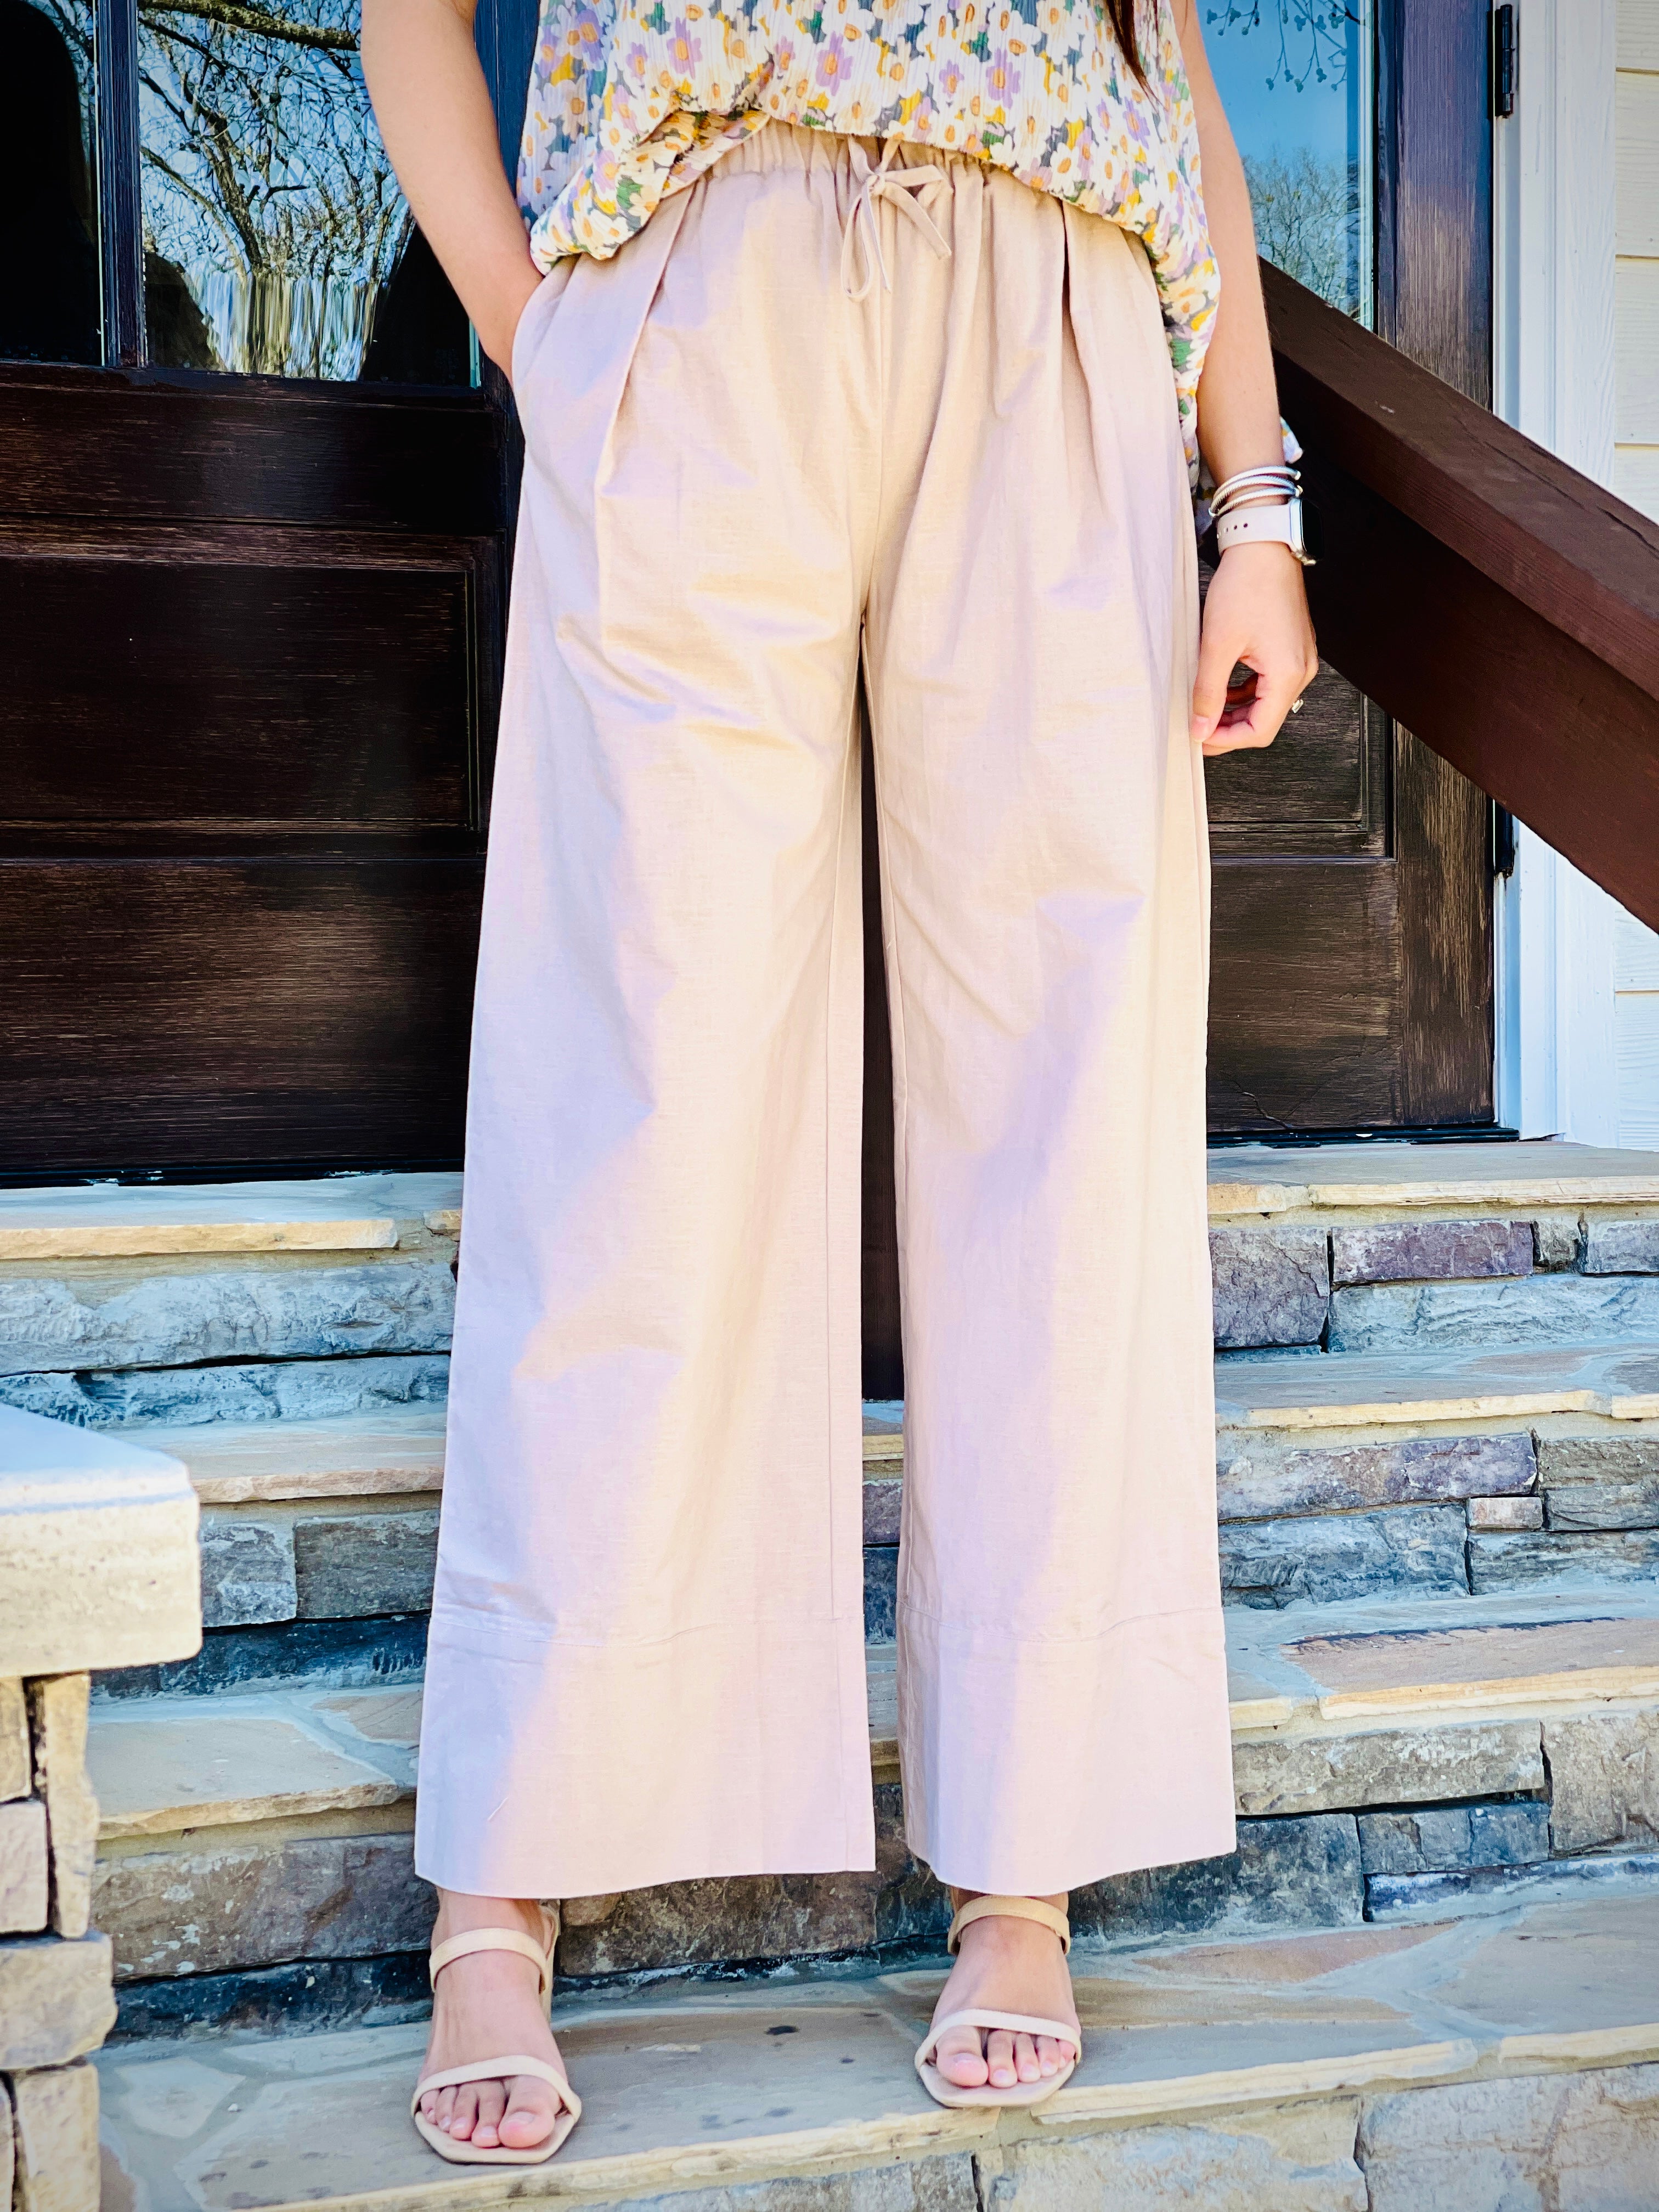 Stretch Twill Cropped Wide Leg - Bright White - Monkee's of Athens